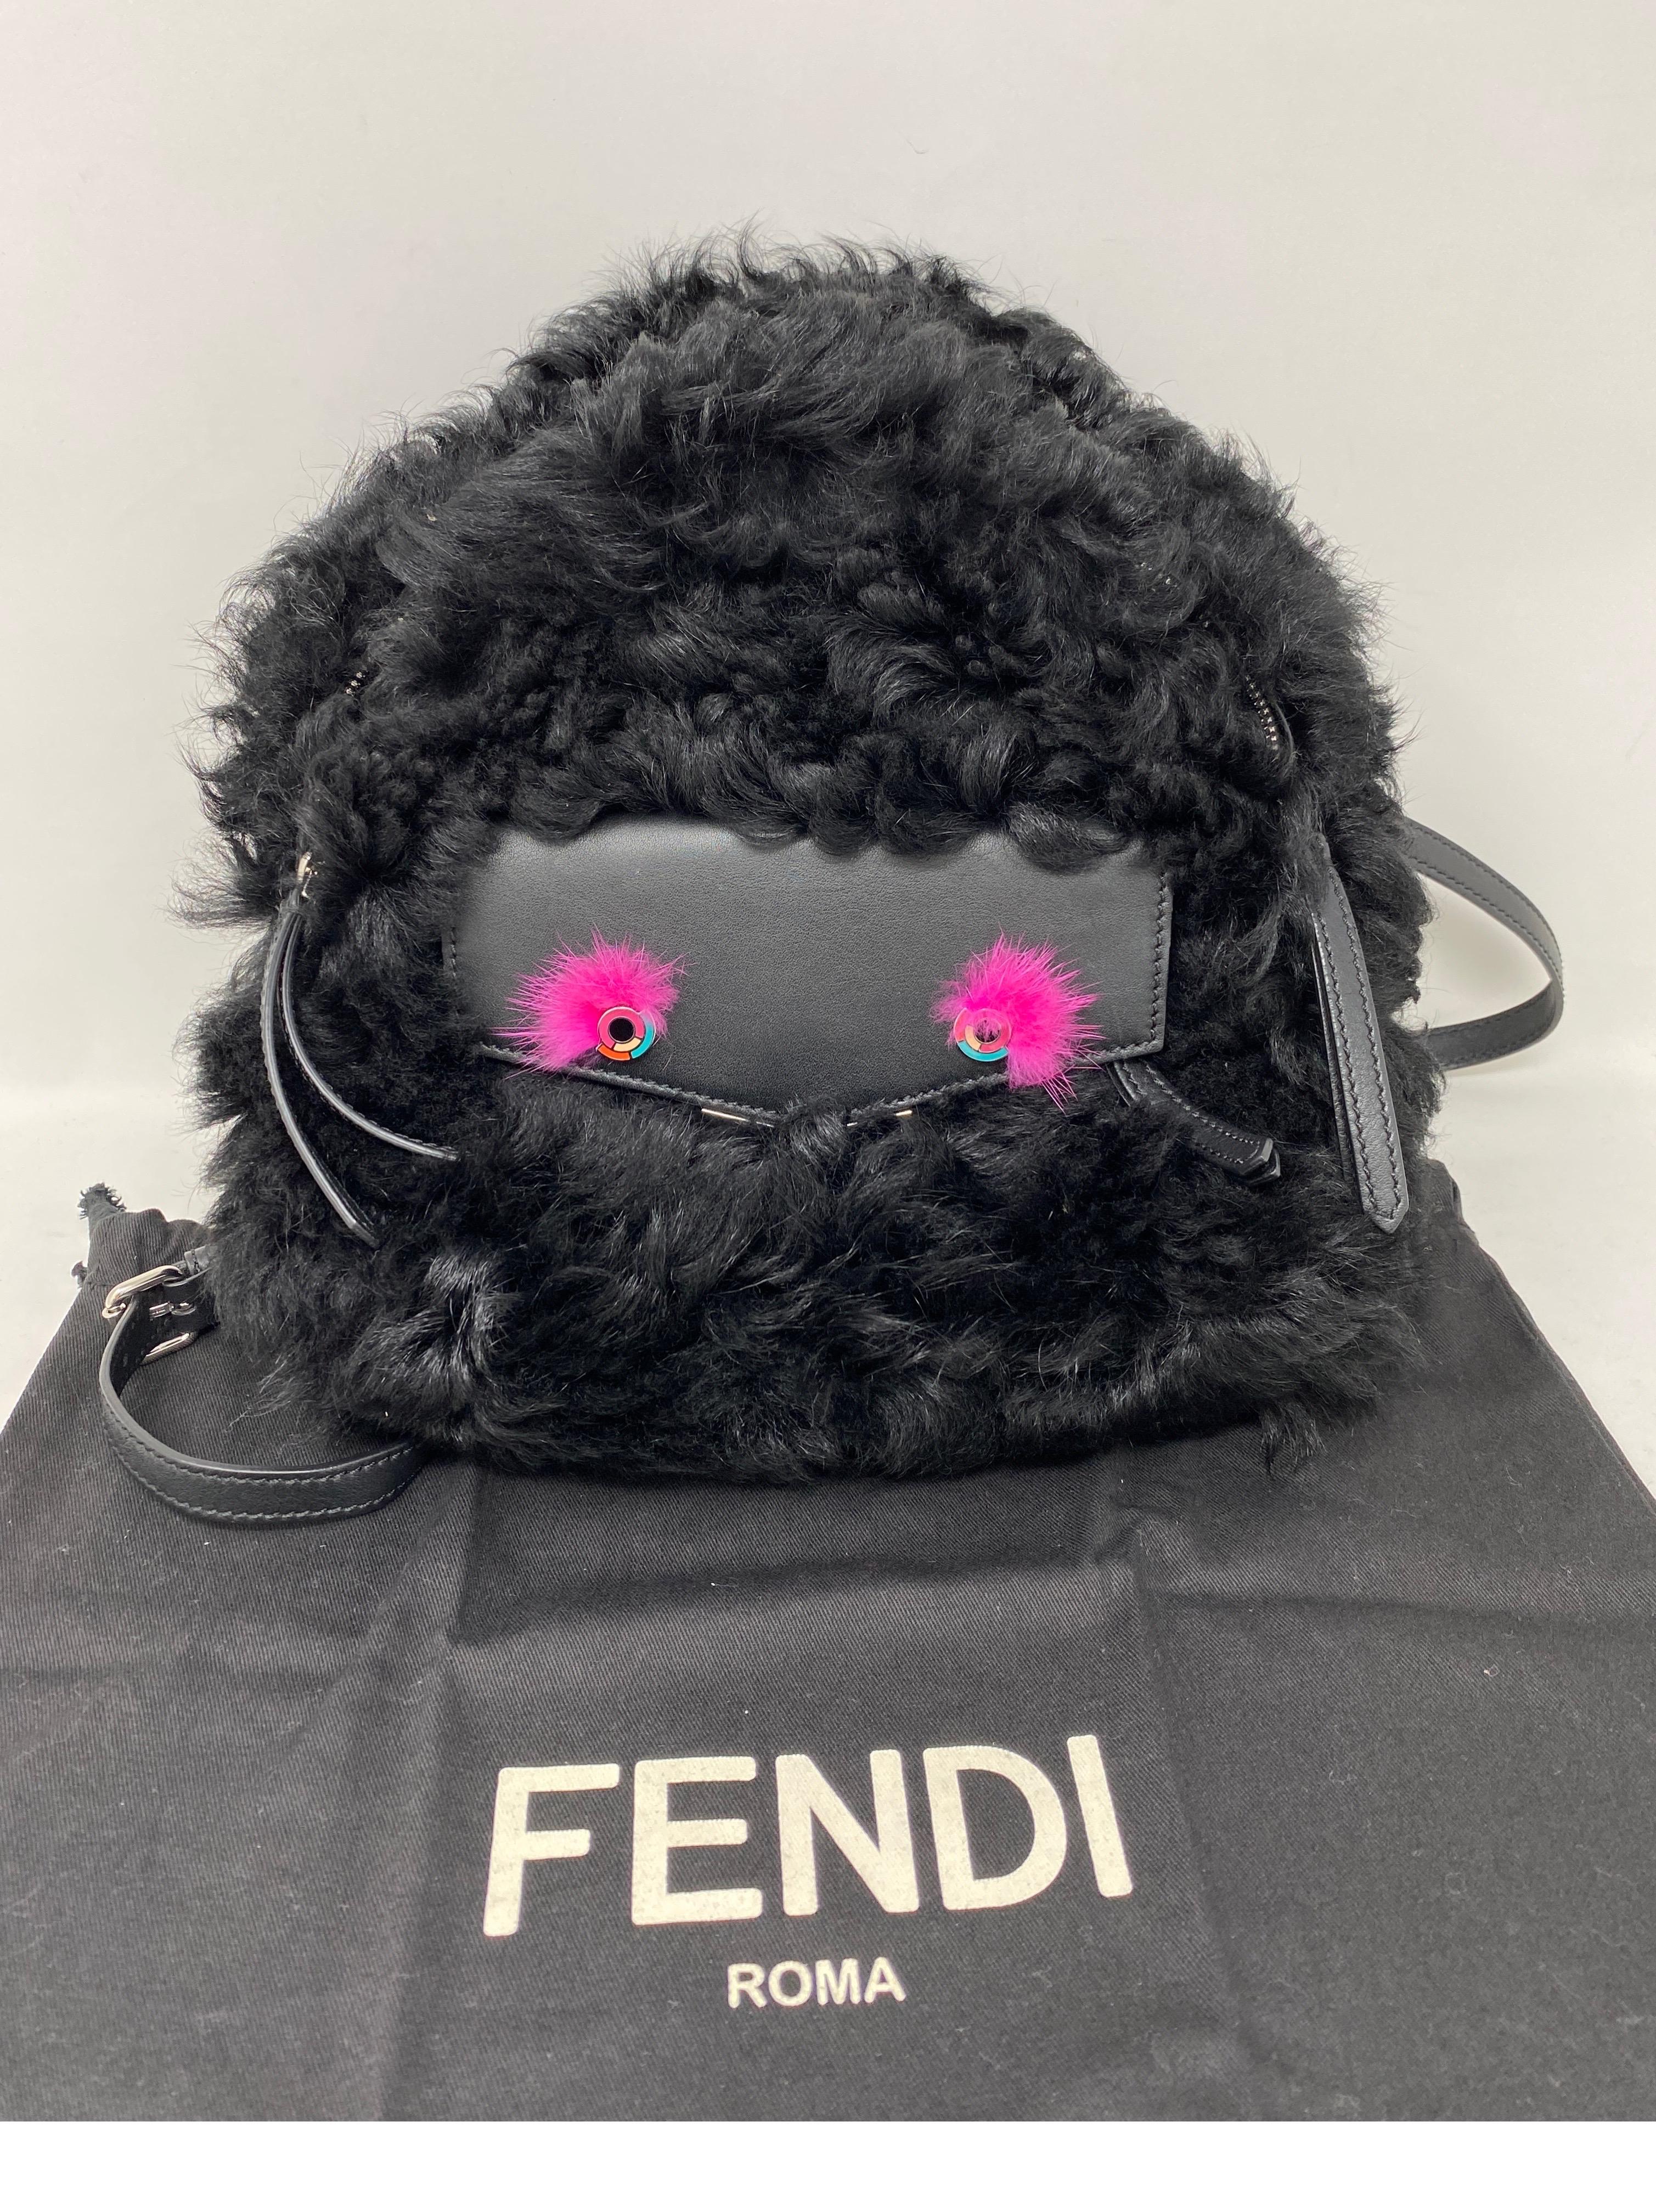 Fendi Furry Black Backpack. Excellent like new condition. Cute and fun backpack. Guaranteed authentic. 